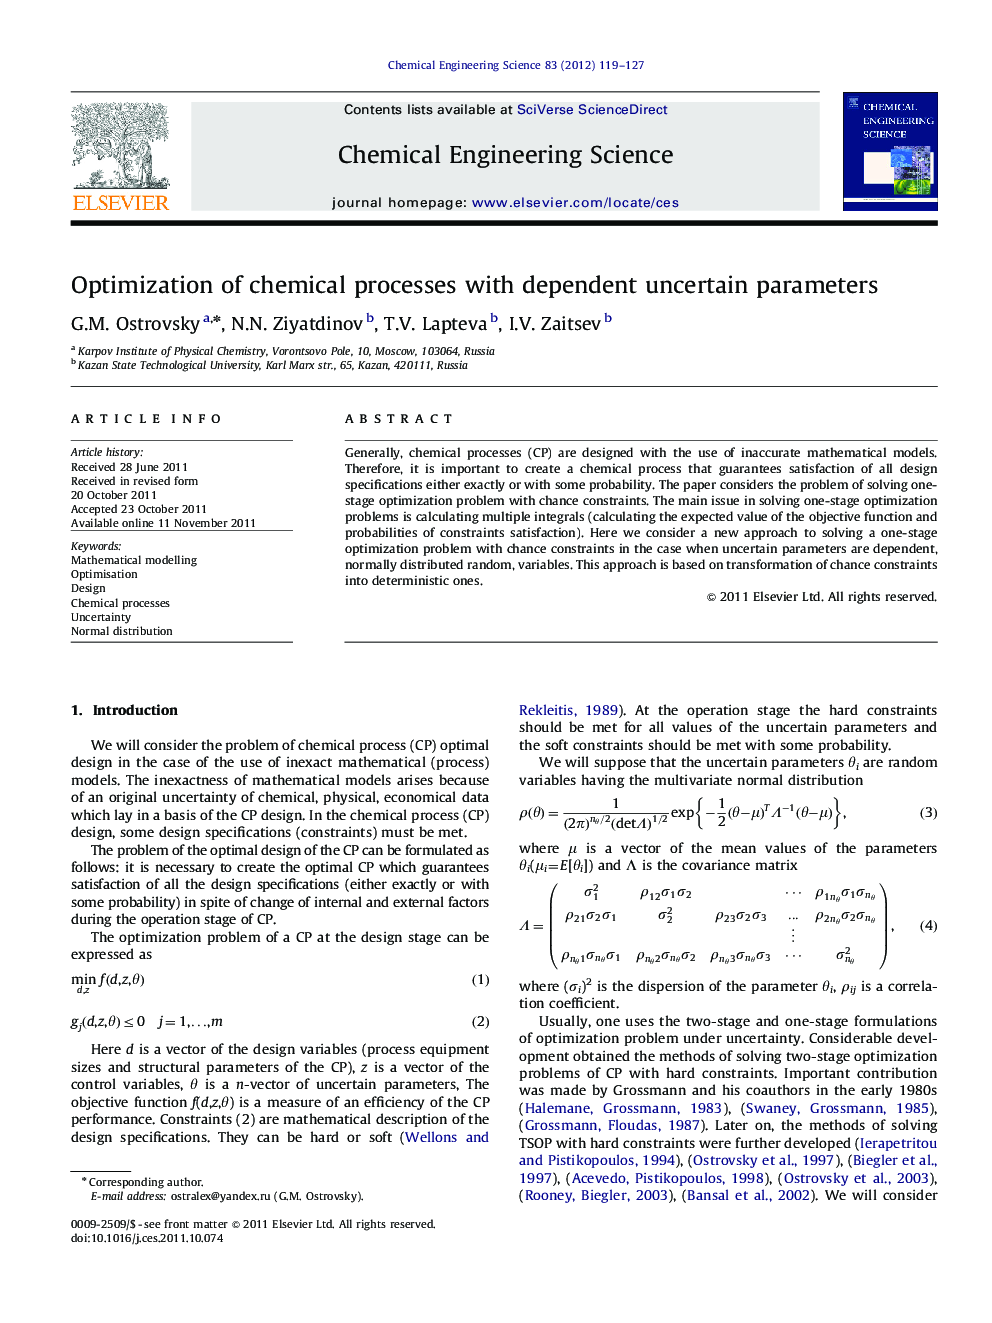 Optimization of chemical processes with dependent uncertain parameters